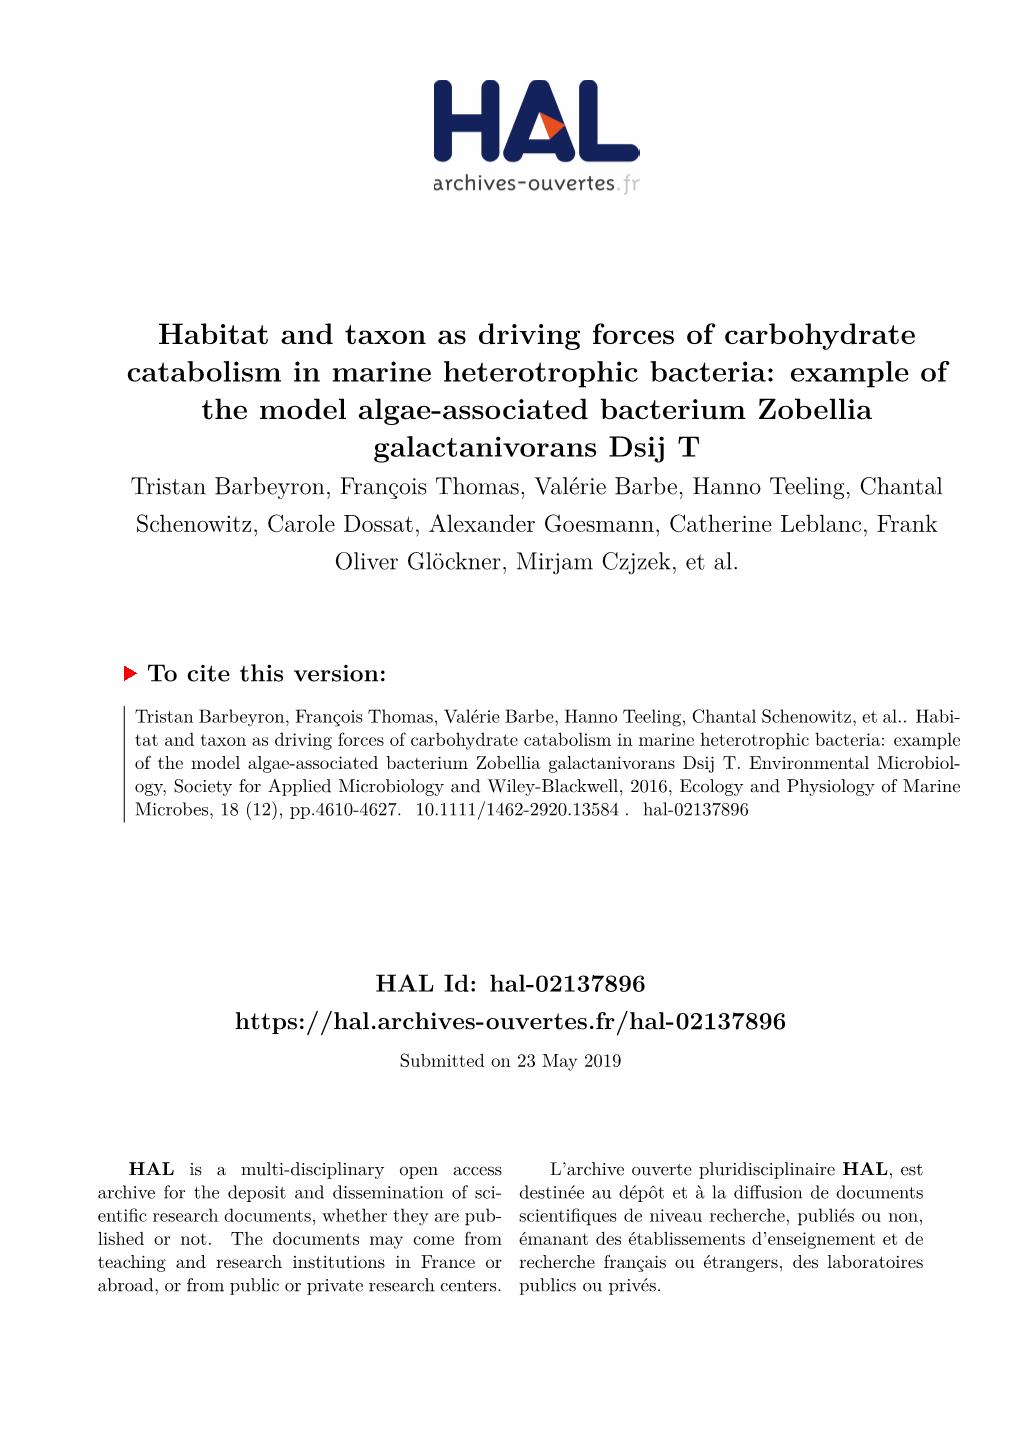 Habitat and Taxon As Driving Forces of Carbohydrate